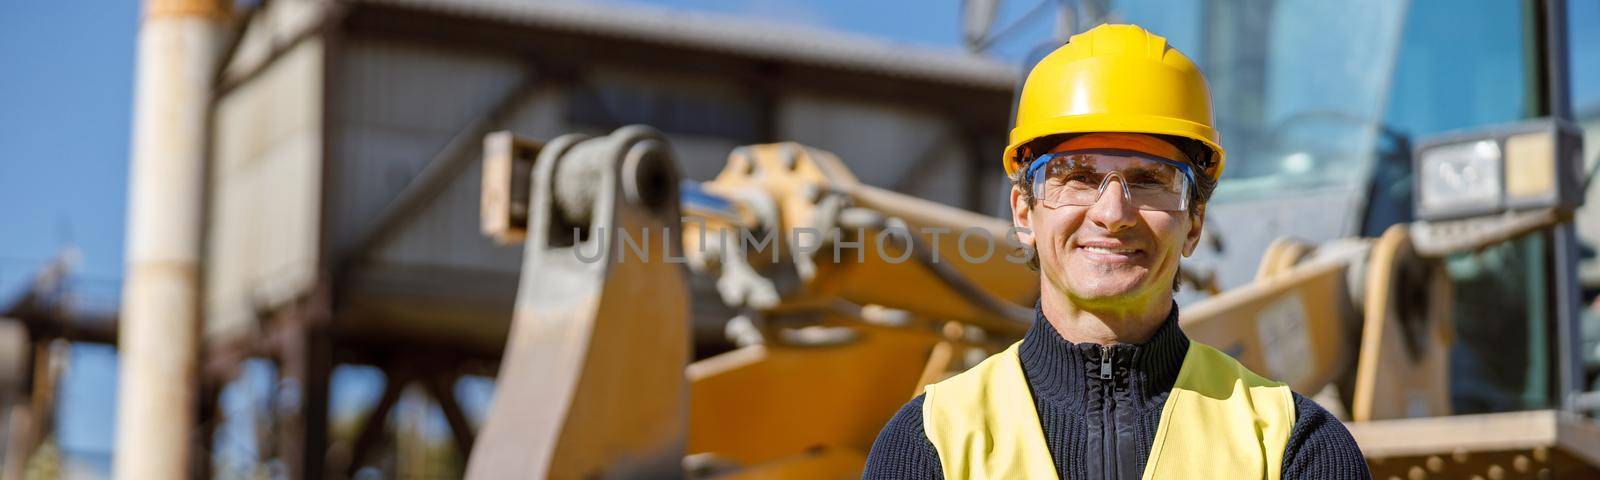 Joyful matured man engineer wearing safety helmet, glasses and vest while keeping arms crossed and smiling